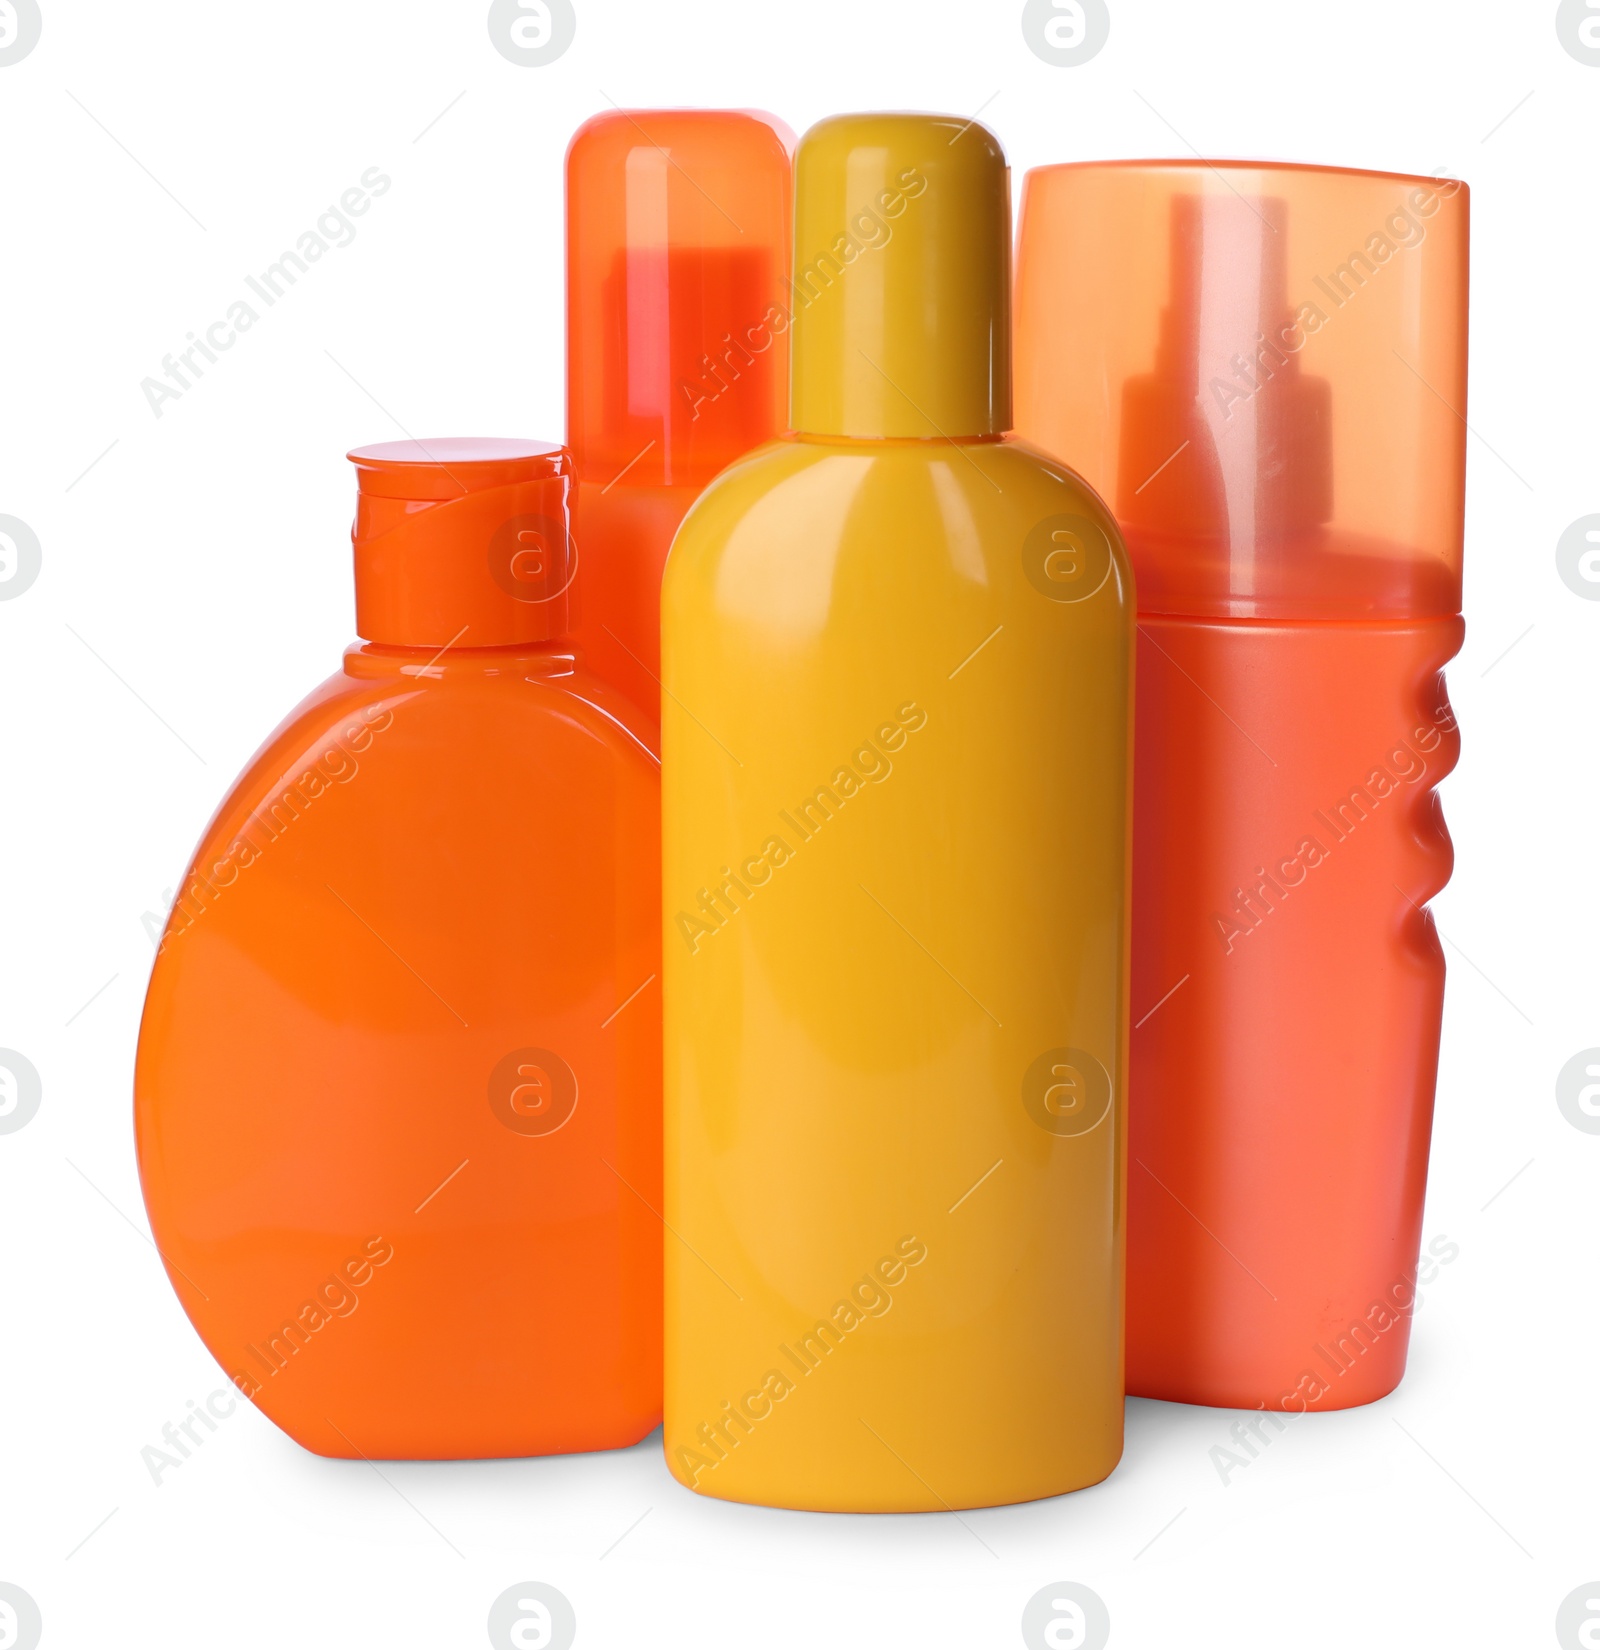 Photo of Bottles with sun protection products isolated on white